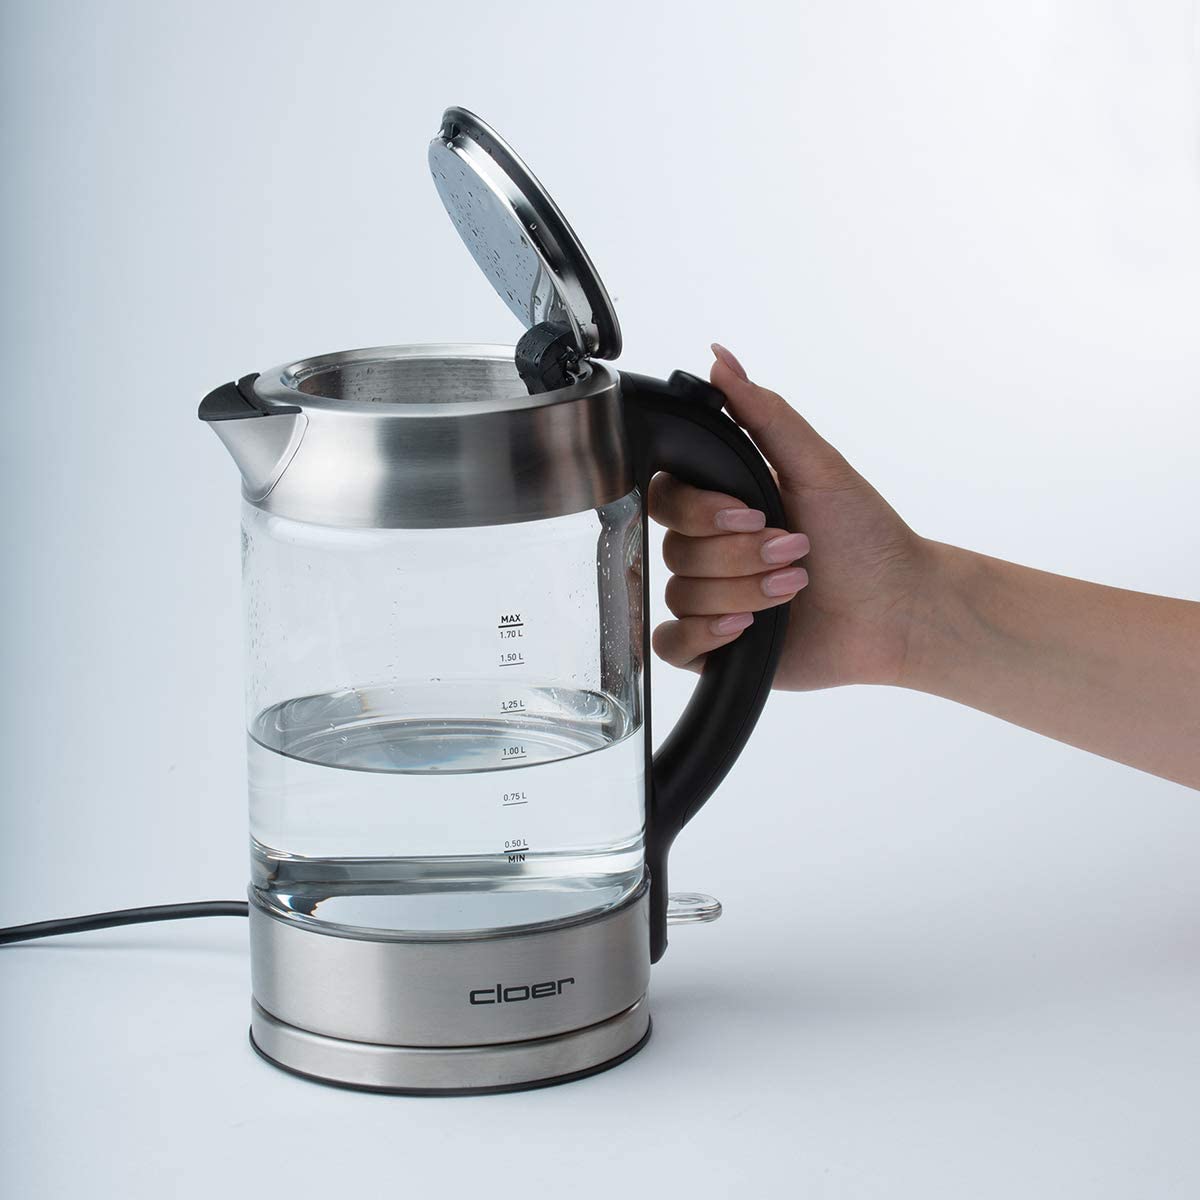 Cloer Stainless Steel Kettle / 2200 W / Water Level Indicator / Boil Dry and Overheating Protection